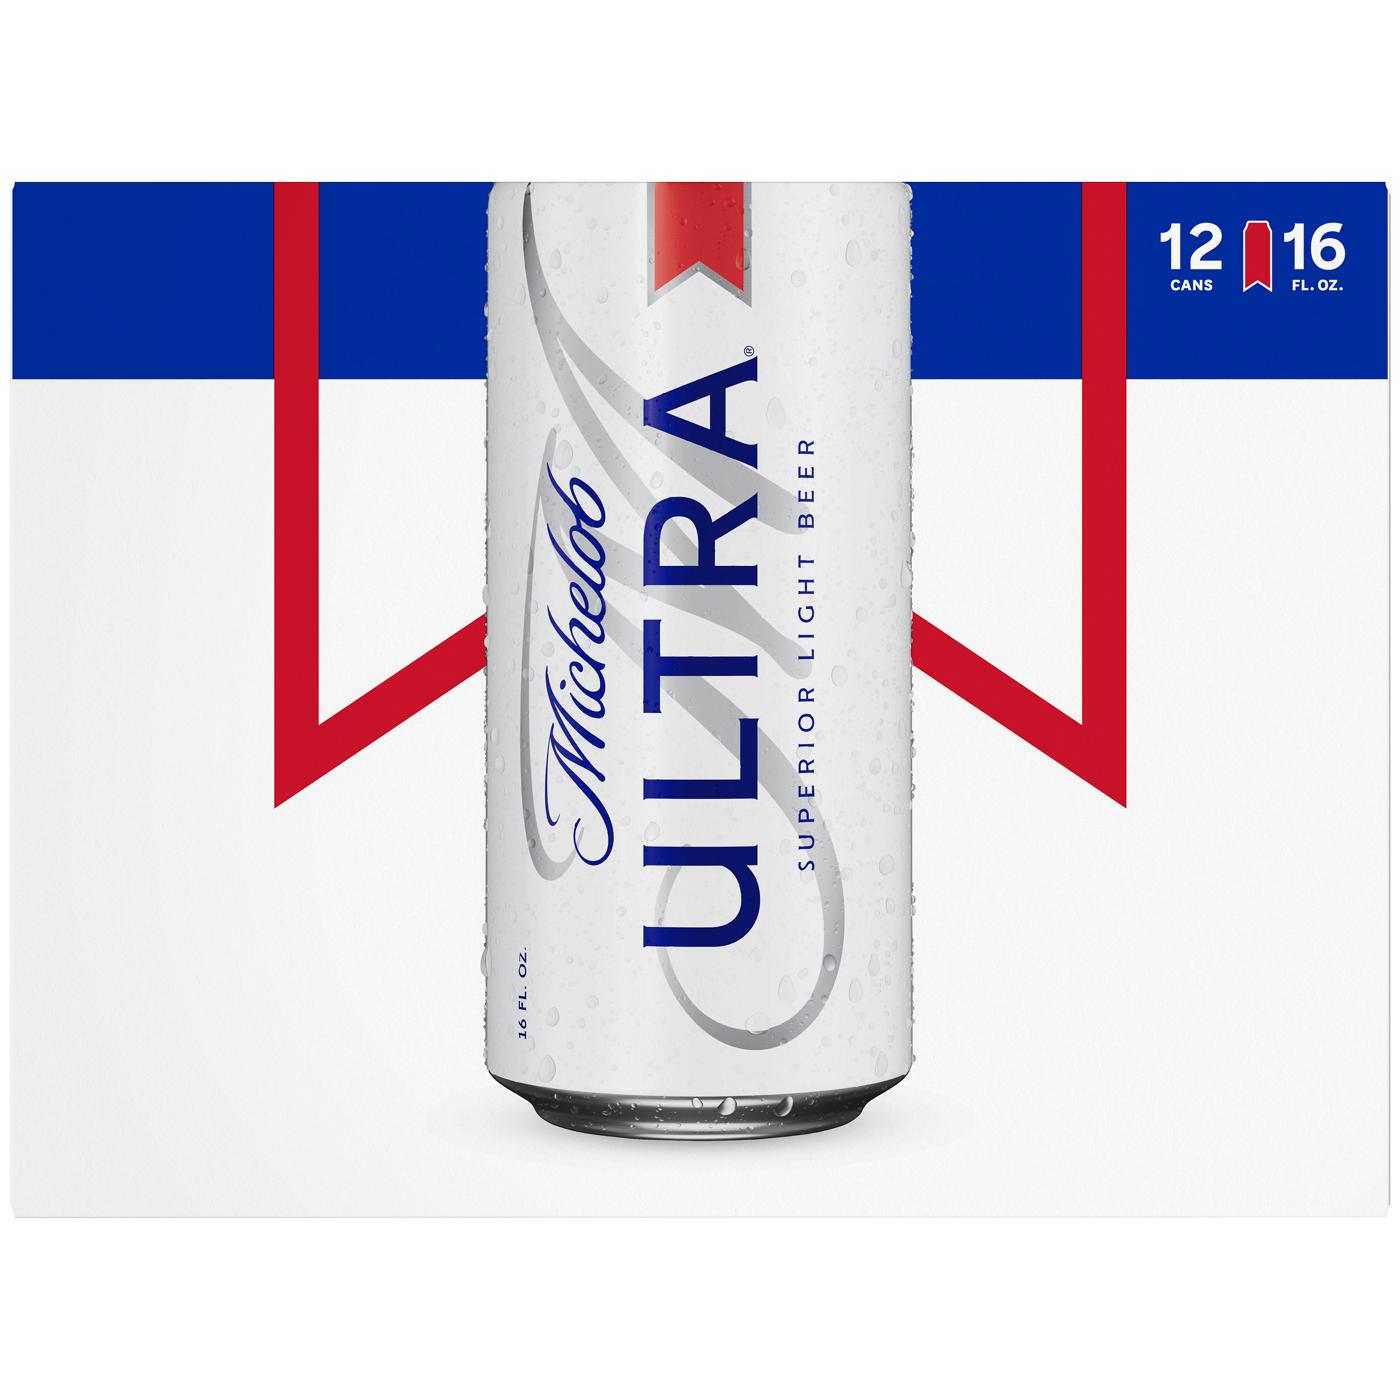 Michelob Ultra Beer 16 oz Cans; image 2 of 2